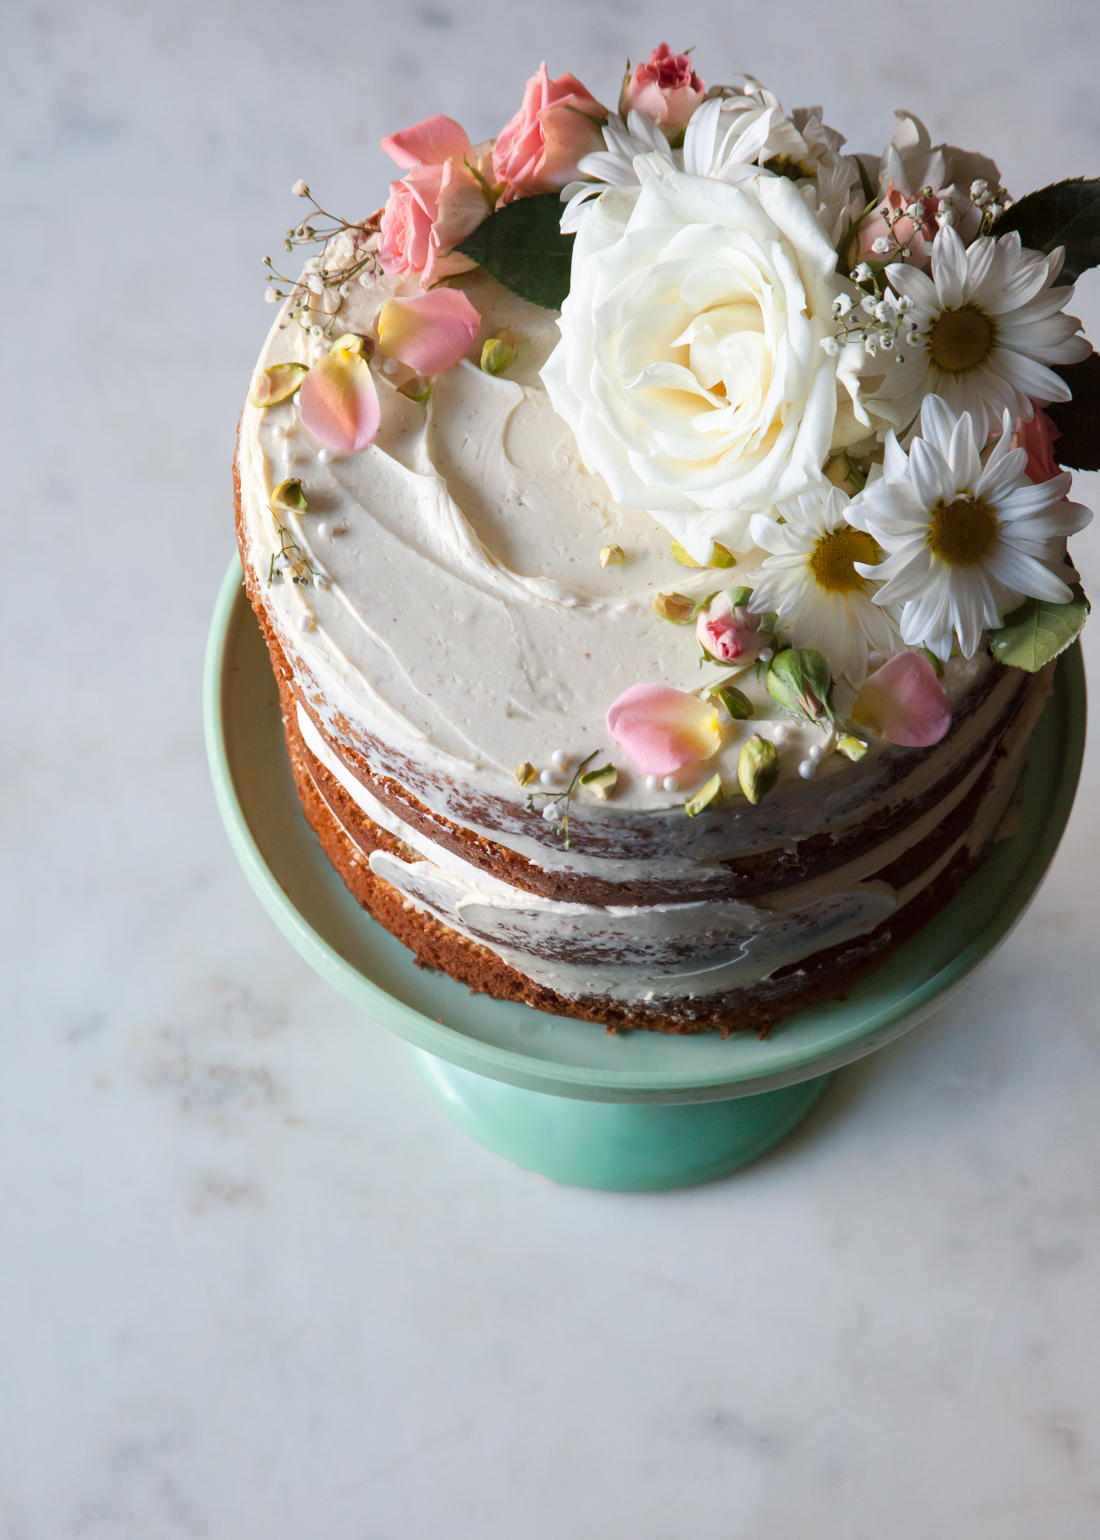 How to Make a Naked Cake